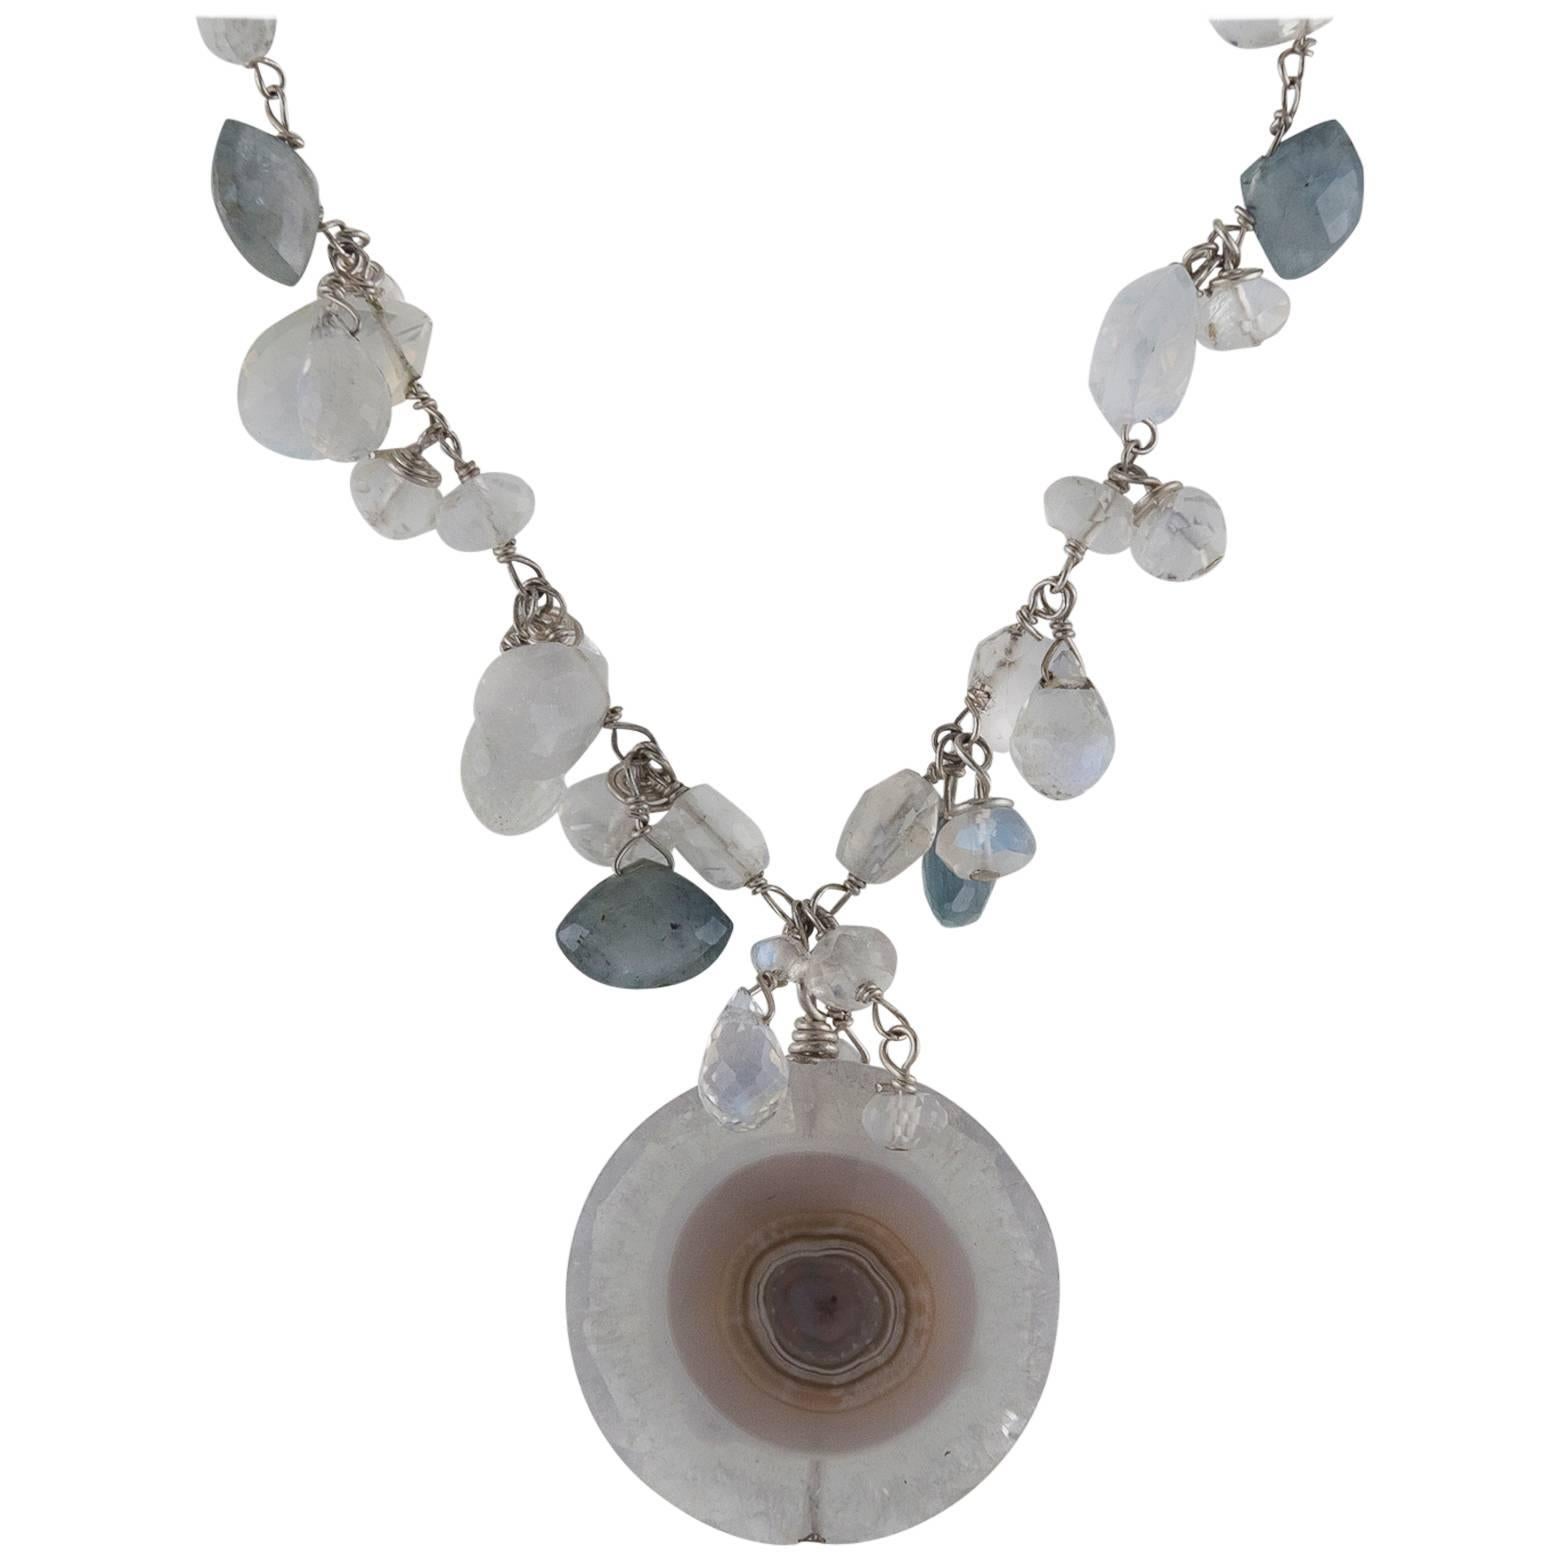 Stalactite Slice Necklace with Moonstone and Labradorite Briolettes